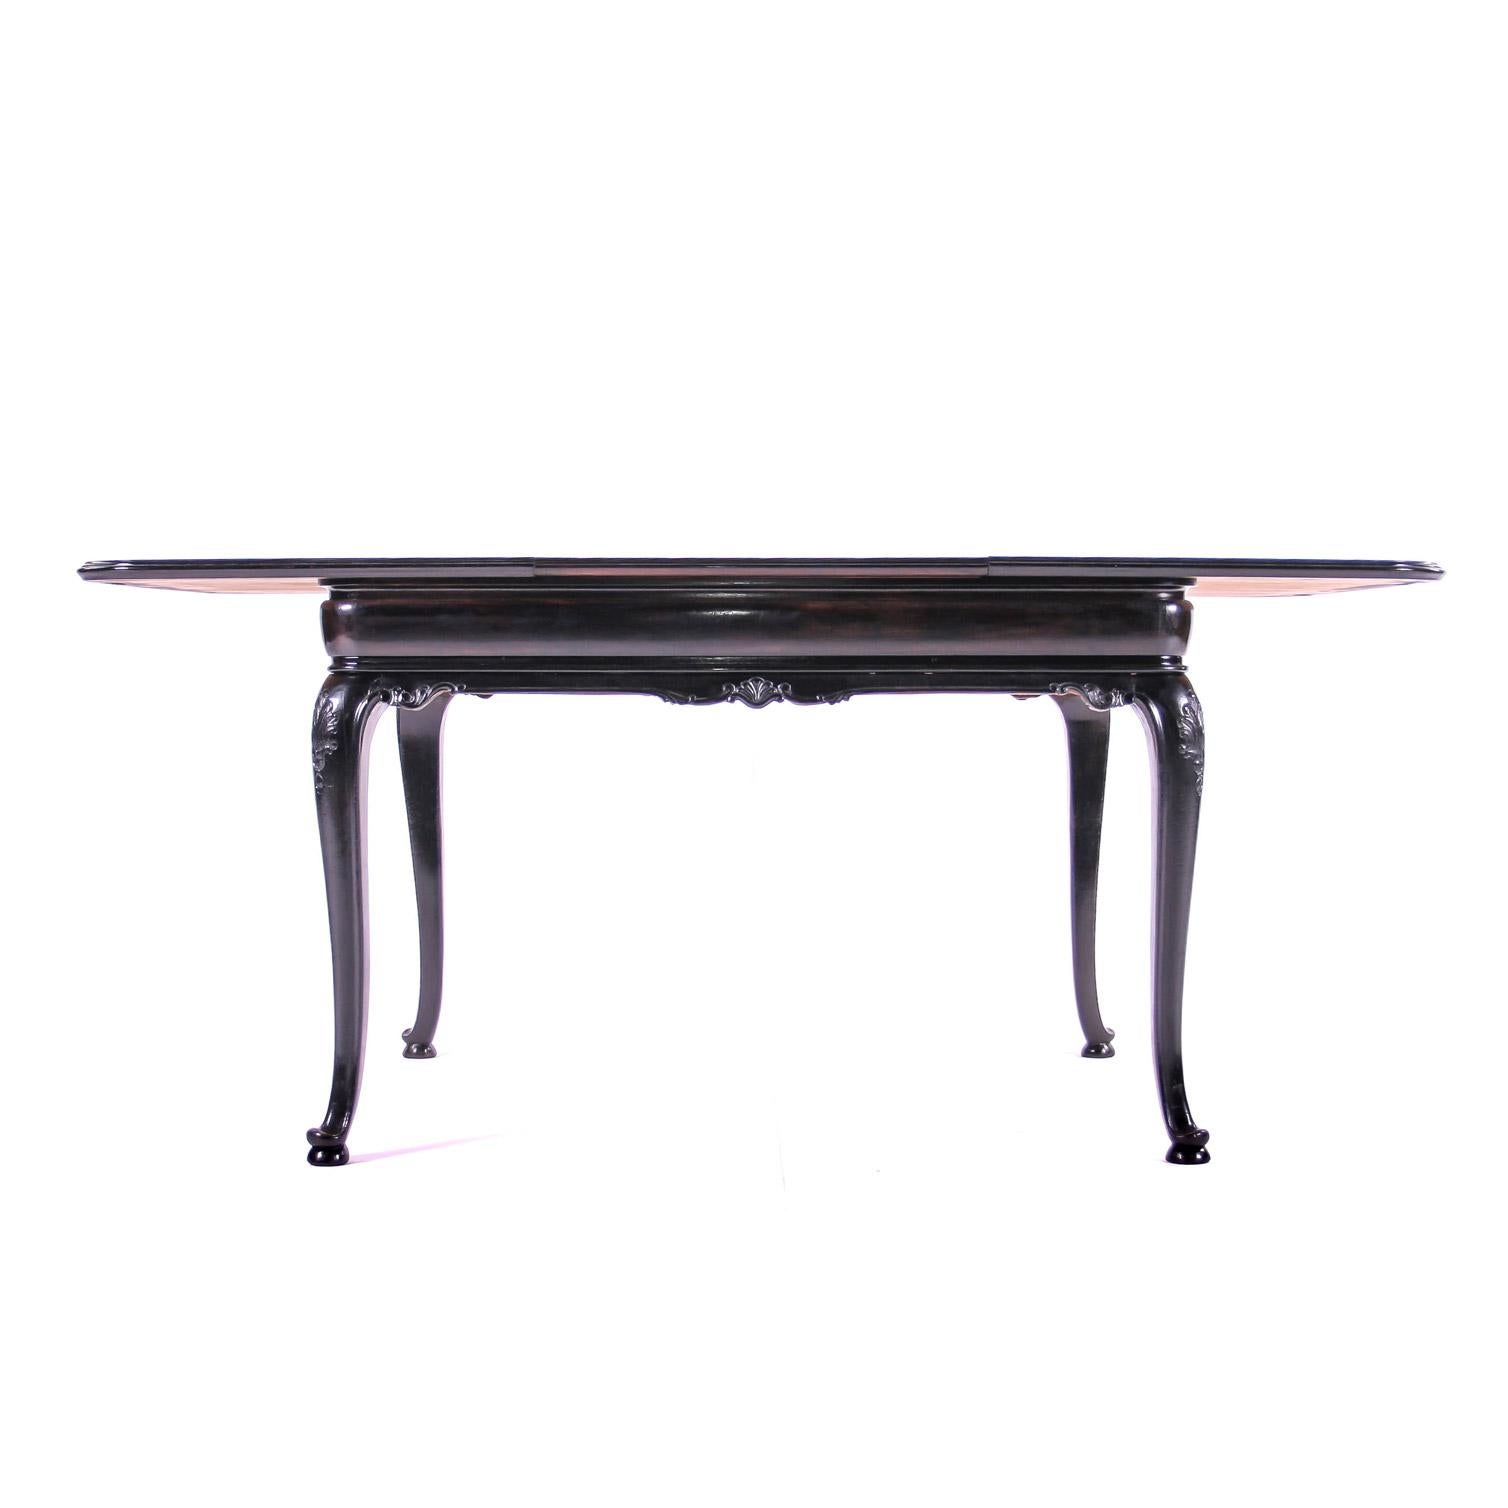 Czech Historism Design Black Dinning Room Folding Table In Good Condition For Sale In Chocen, Czech Republic